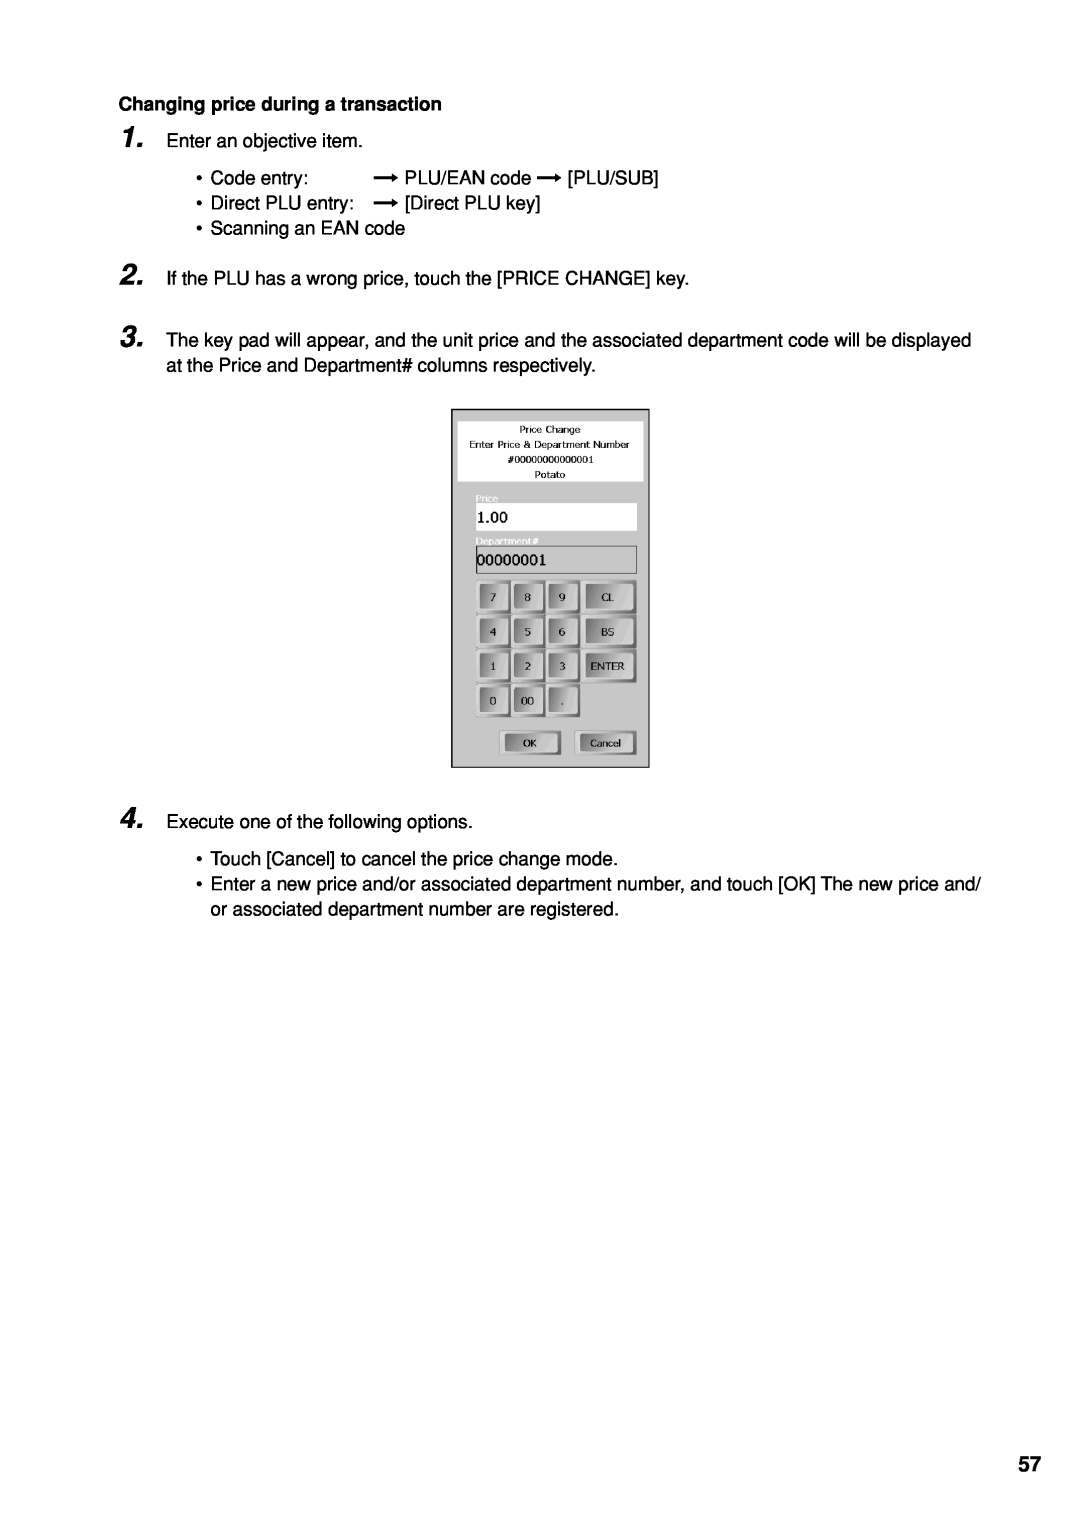 Sharp UP-X300 instruction manual Changing price during a transaction 